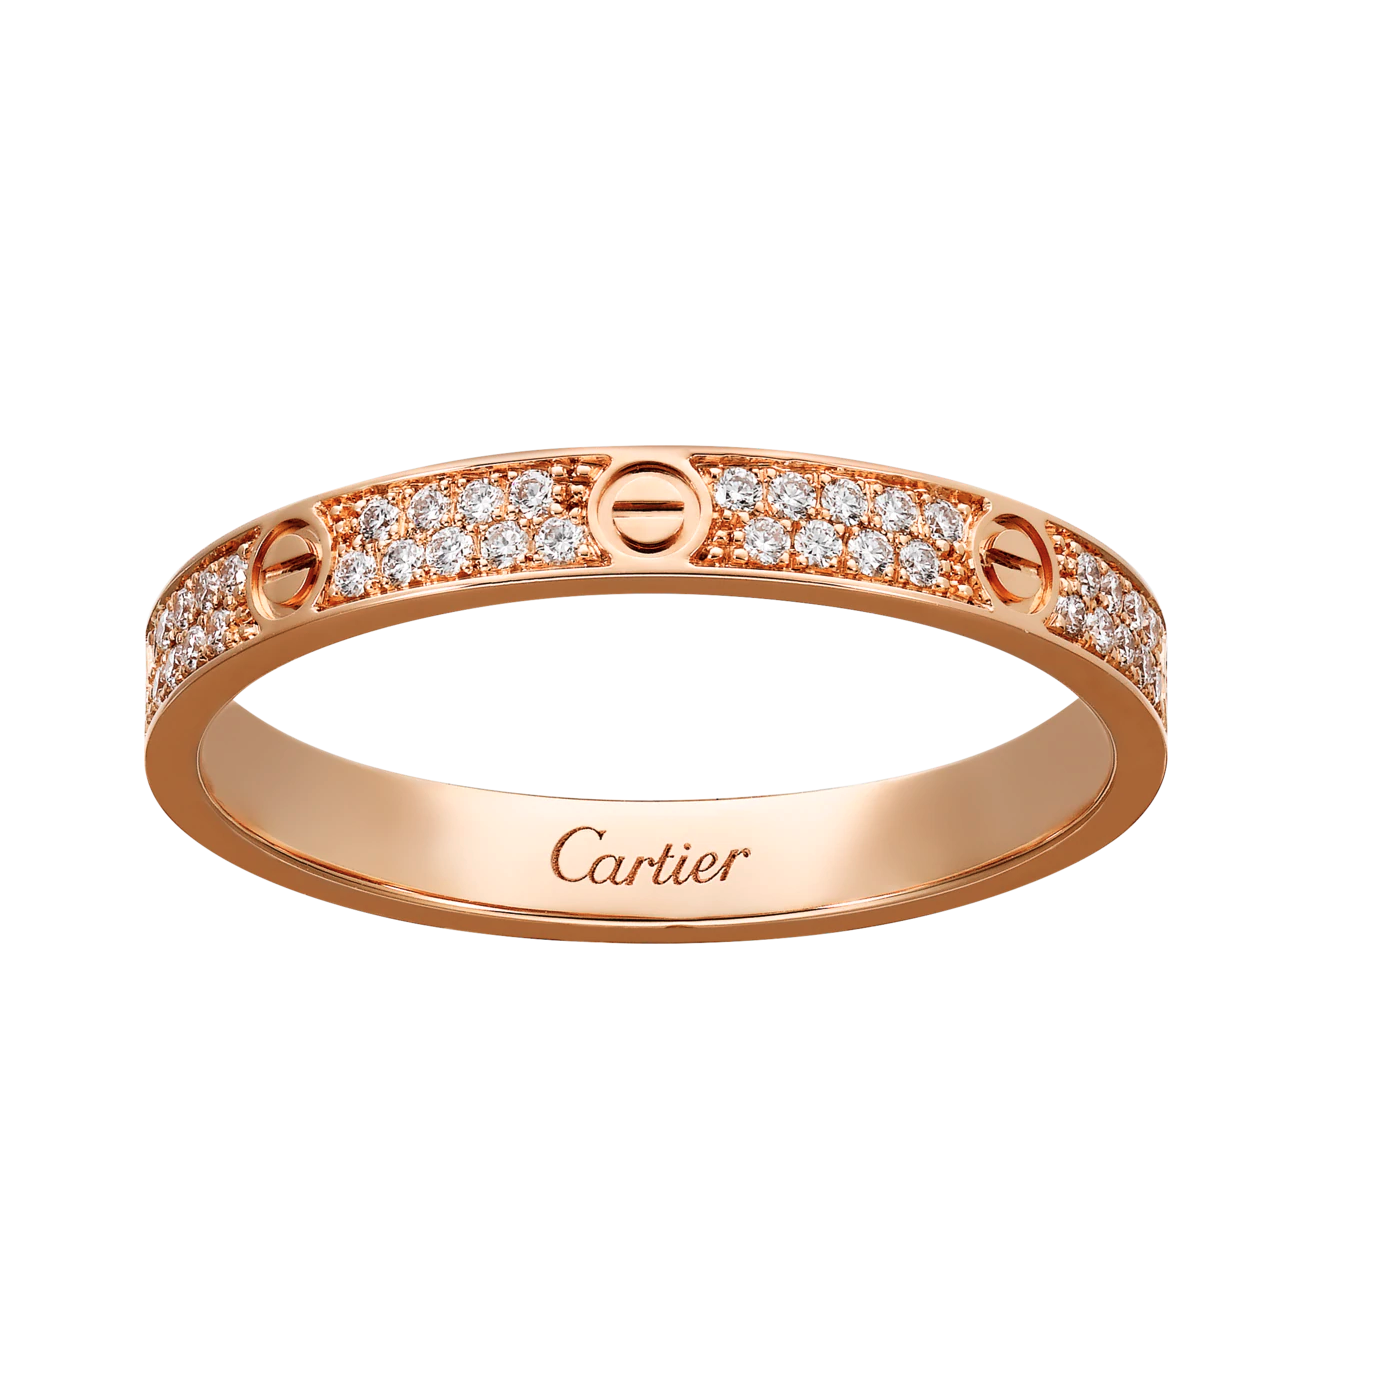 Brilliant-cut diamond ring adorned with screw details within 18K gold